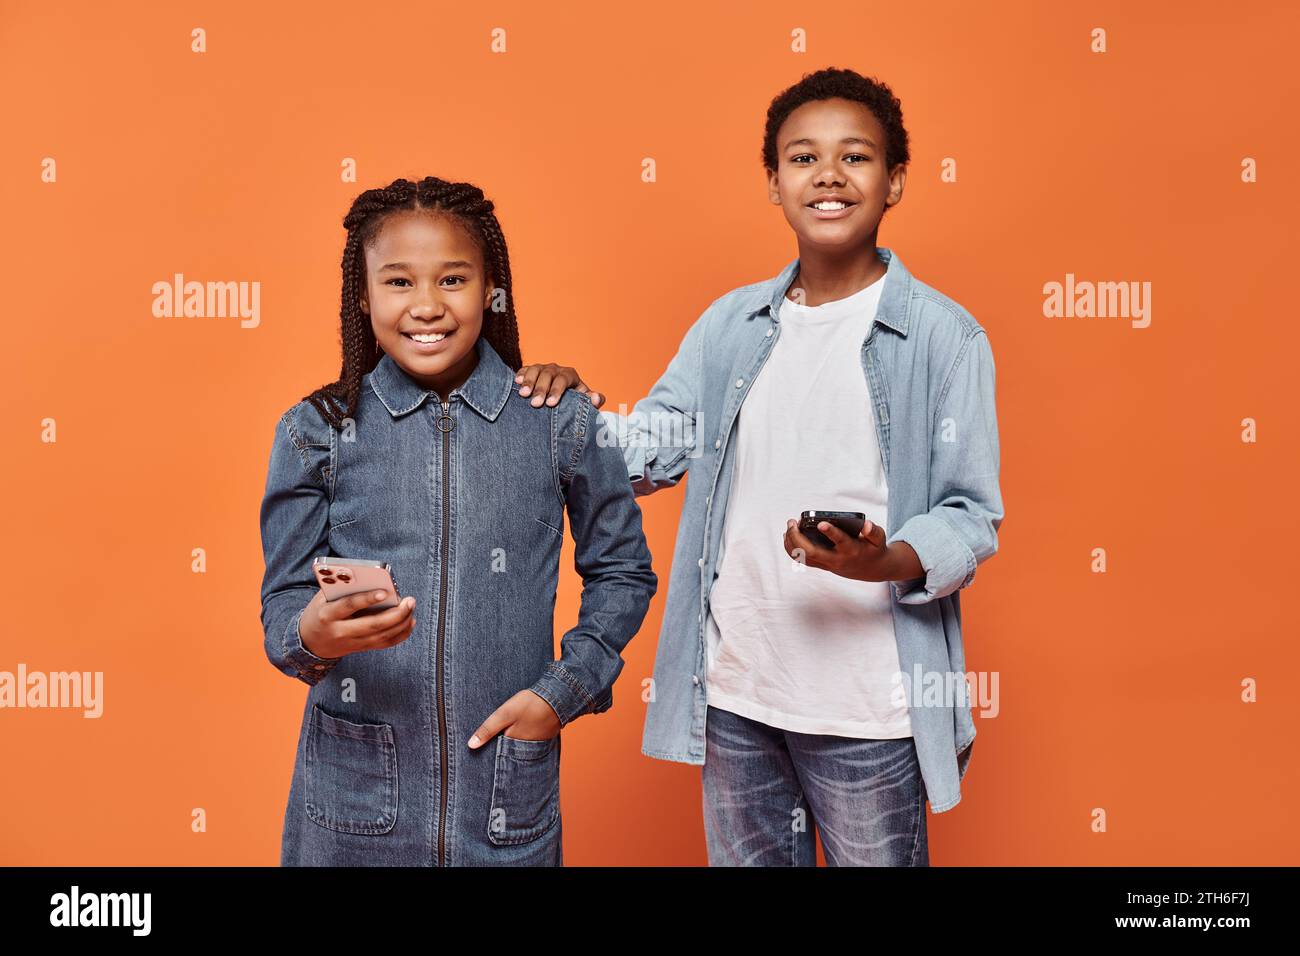 happy african american girl and boy in casual wear holding smartphones on orange background Stock Photo